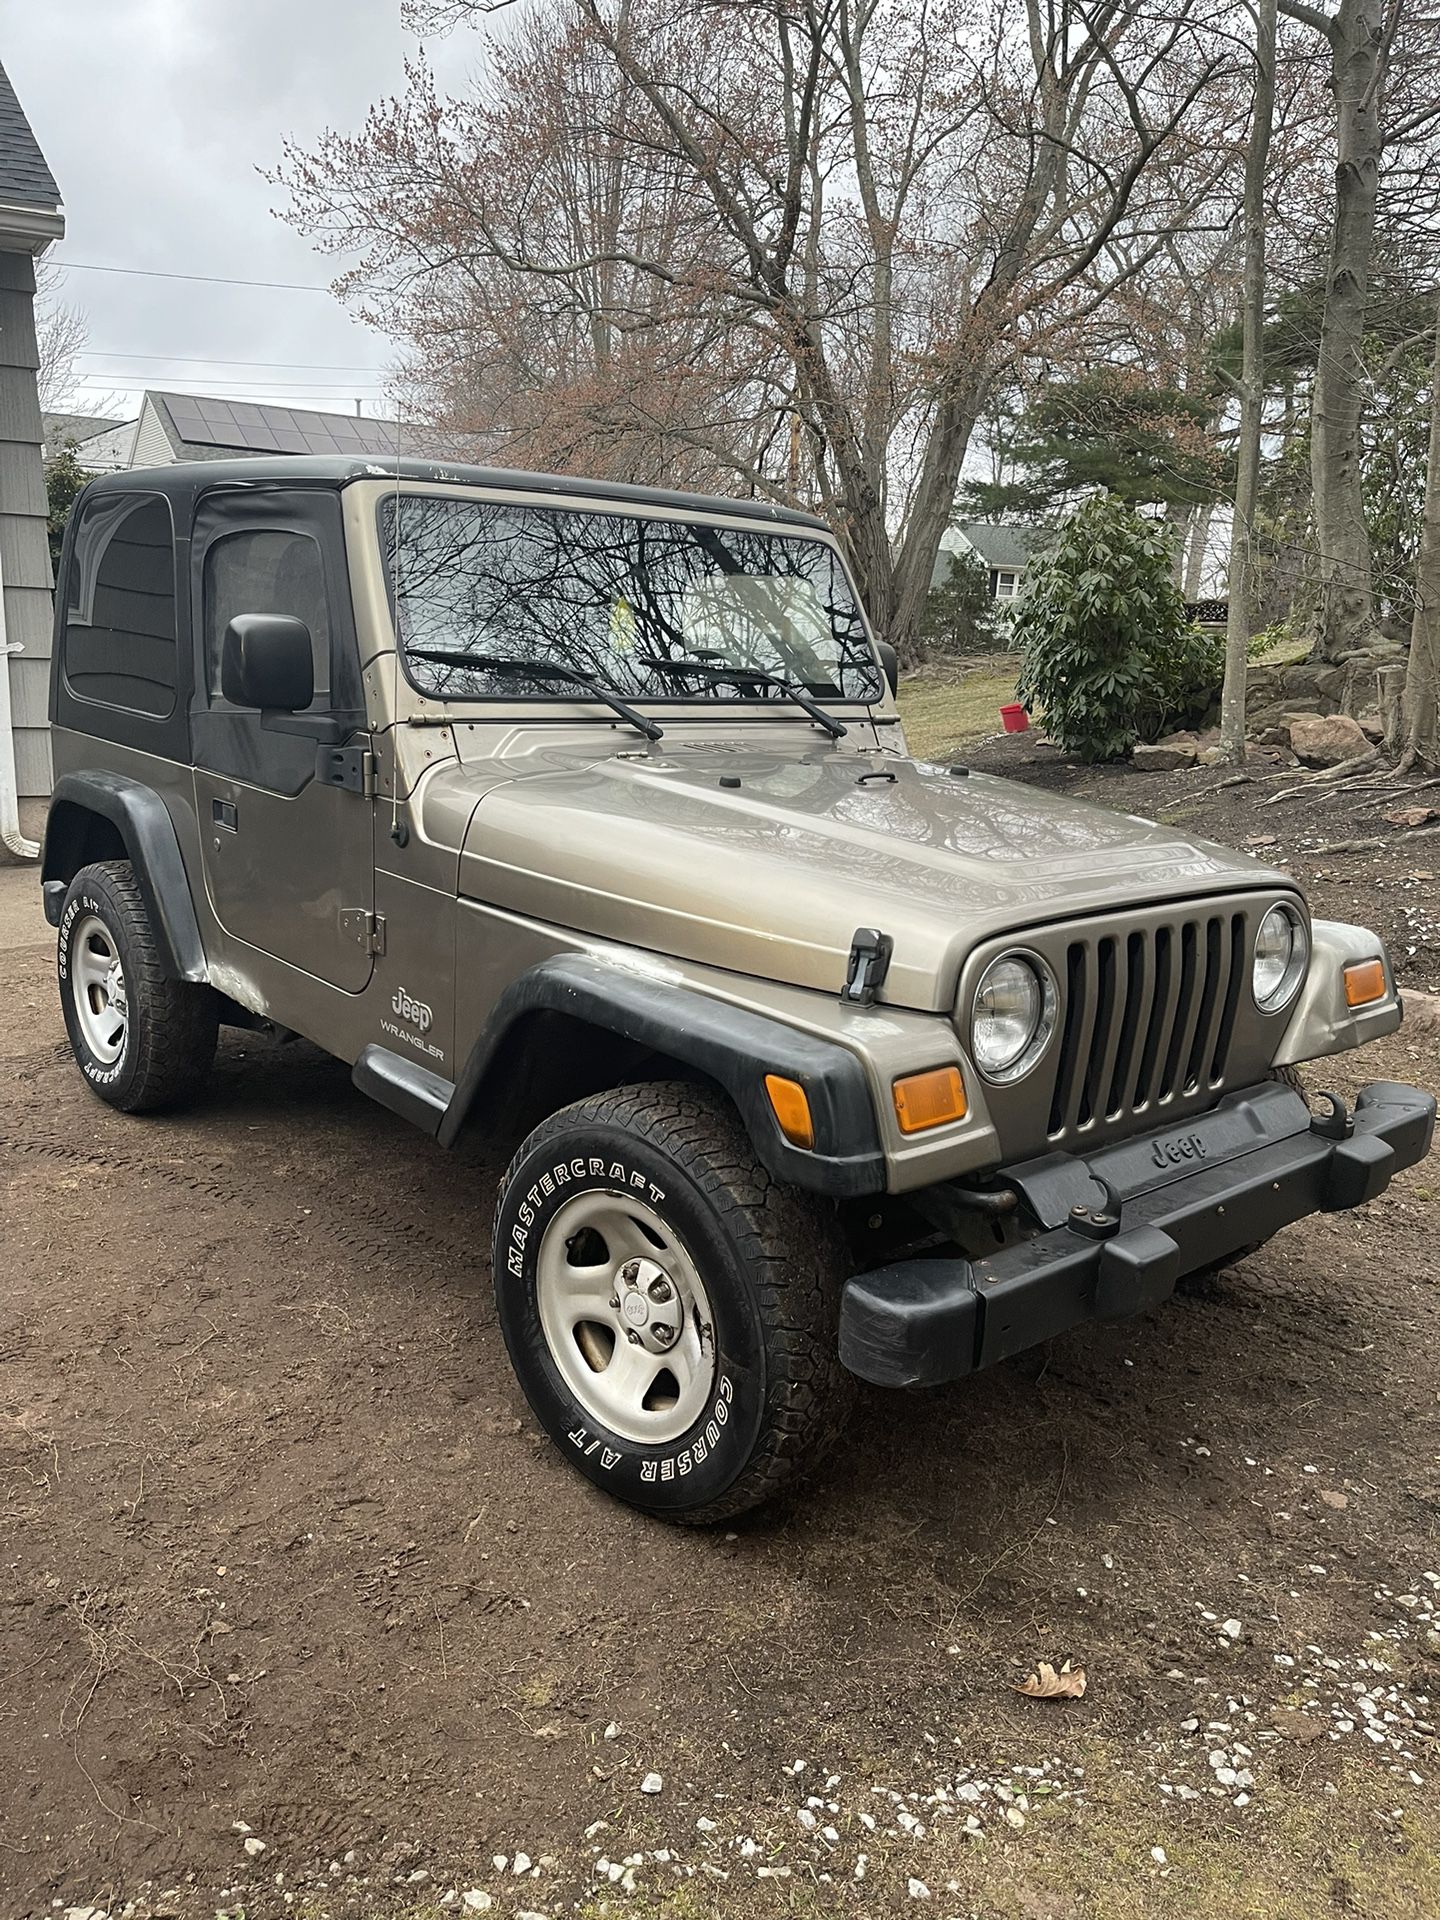 2004 Jeep Wrangler for Sale in East Haven, CT - OfferUp